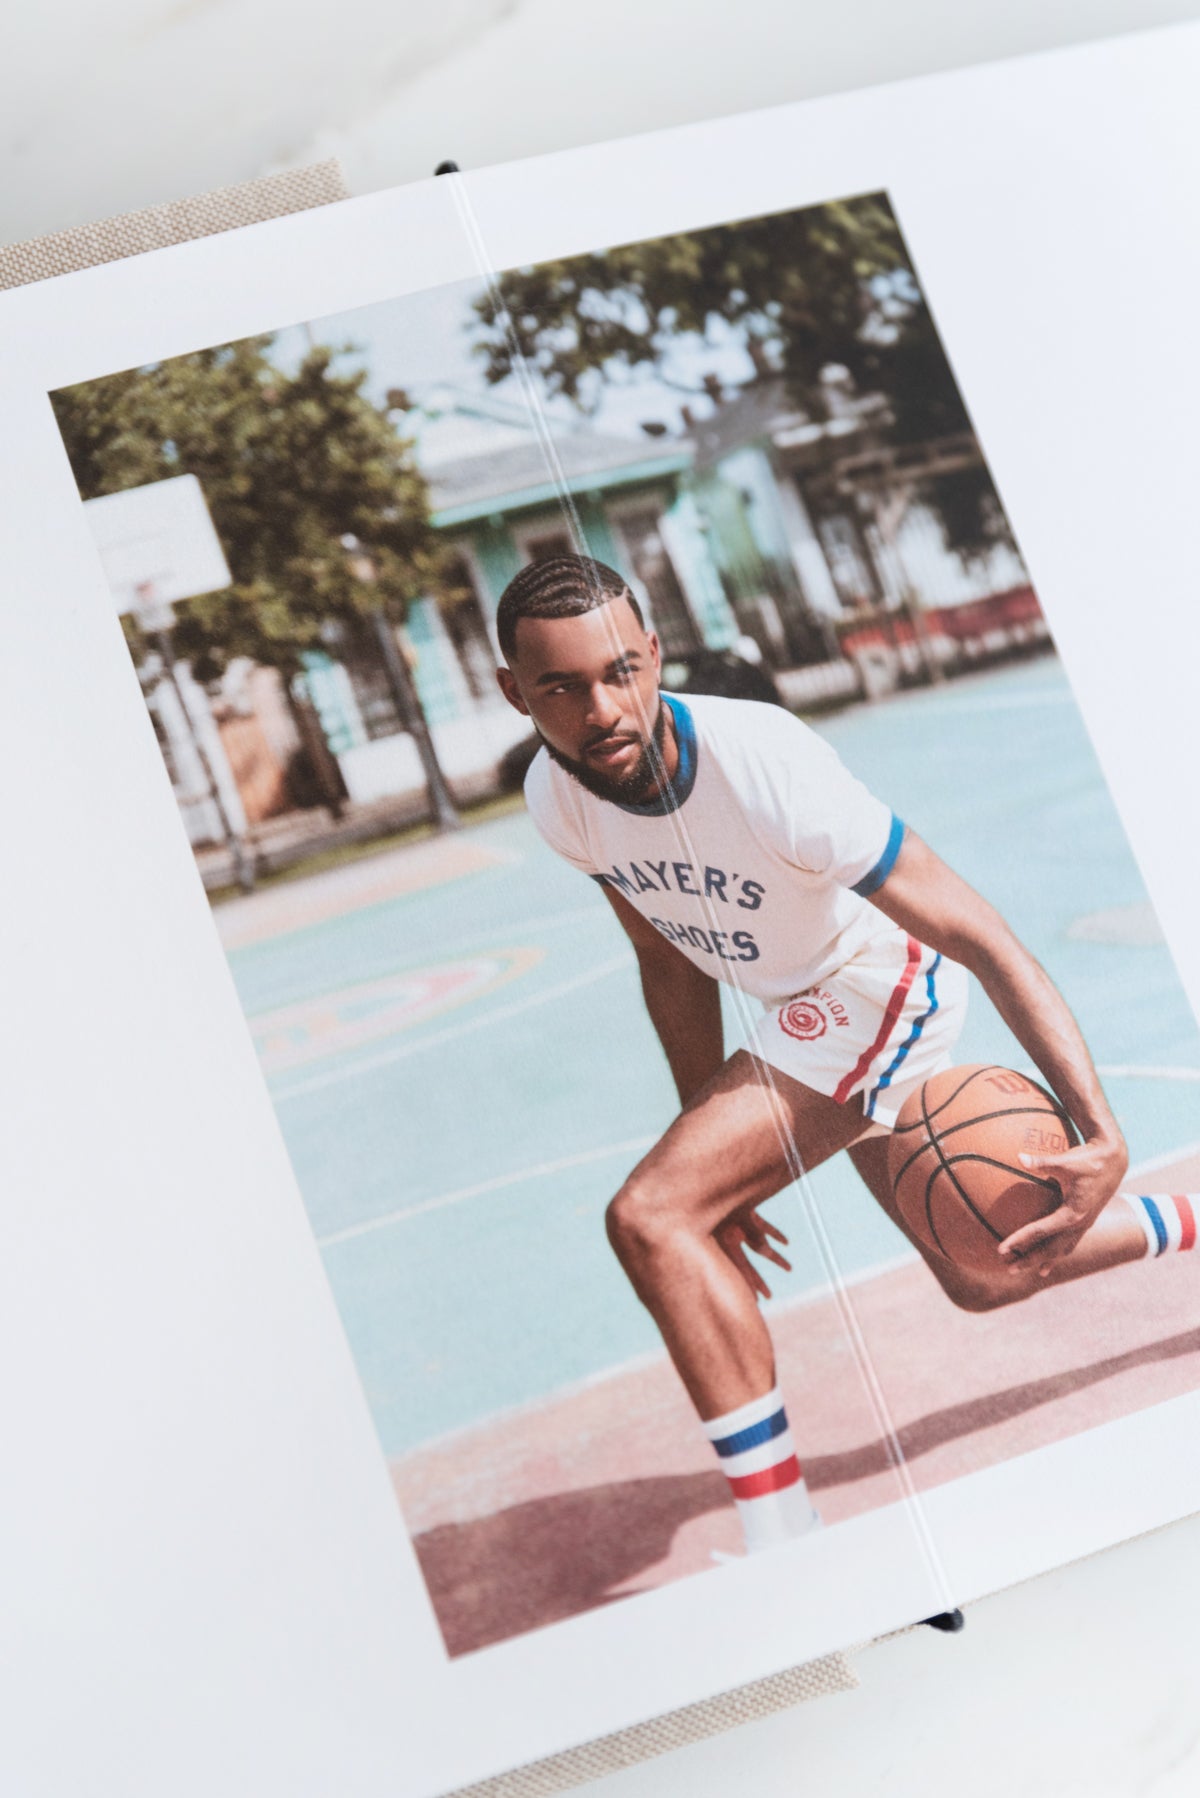 Artifact Uprising Layflat Photo Portfolio Book opened to mid-motion portrait of young man dribbling basketball between his legs